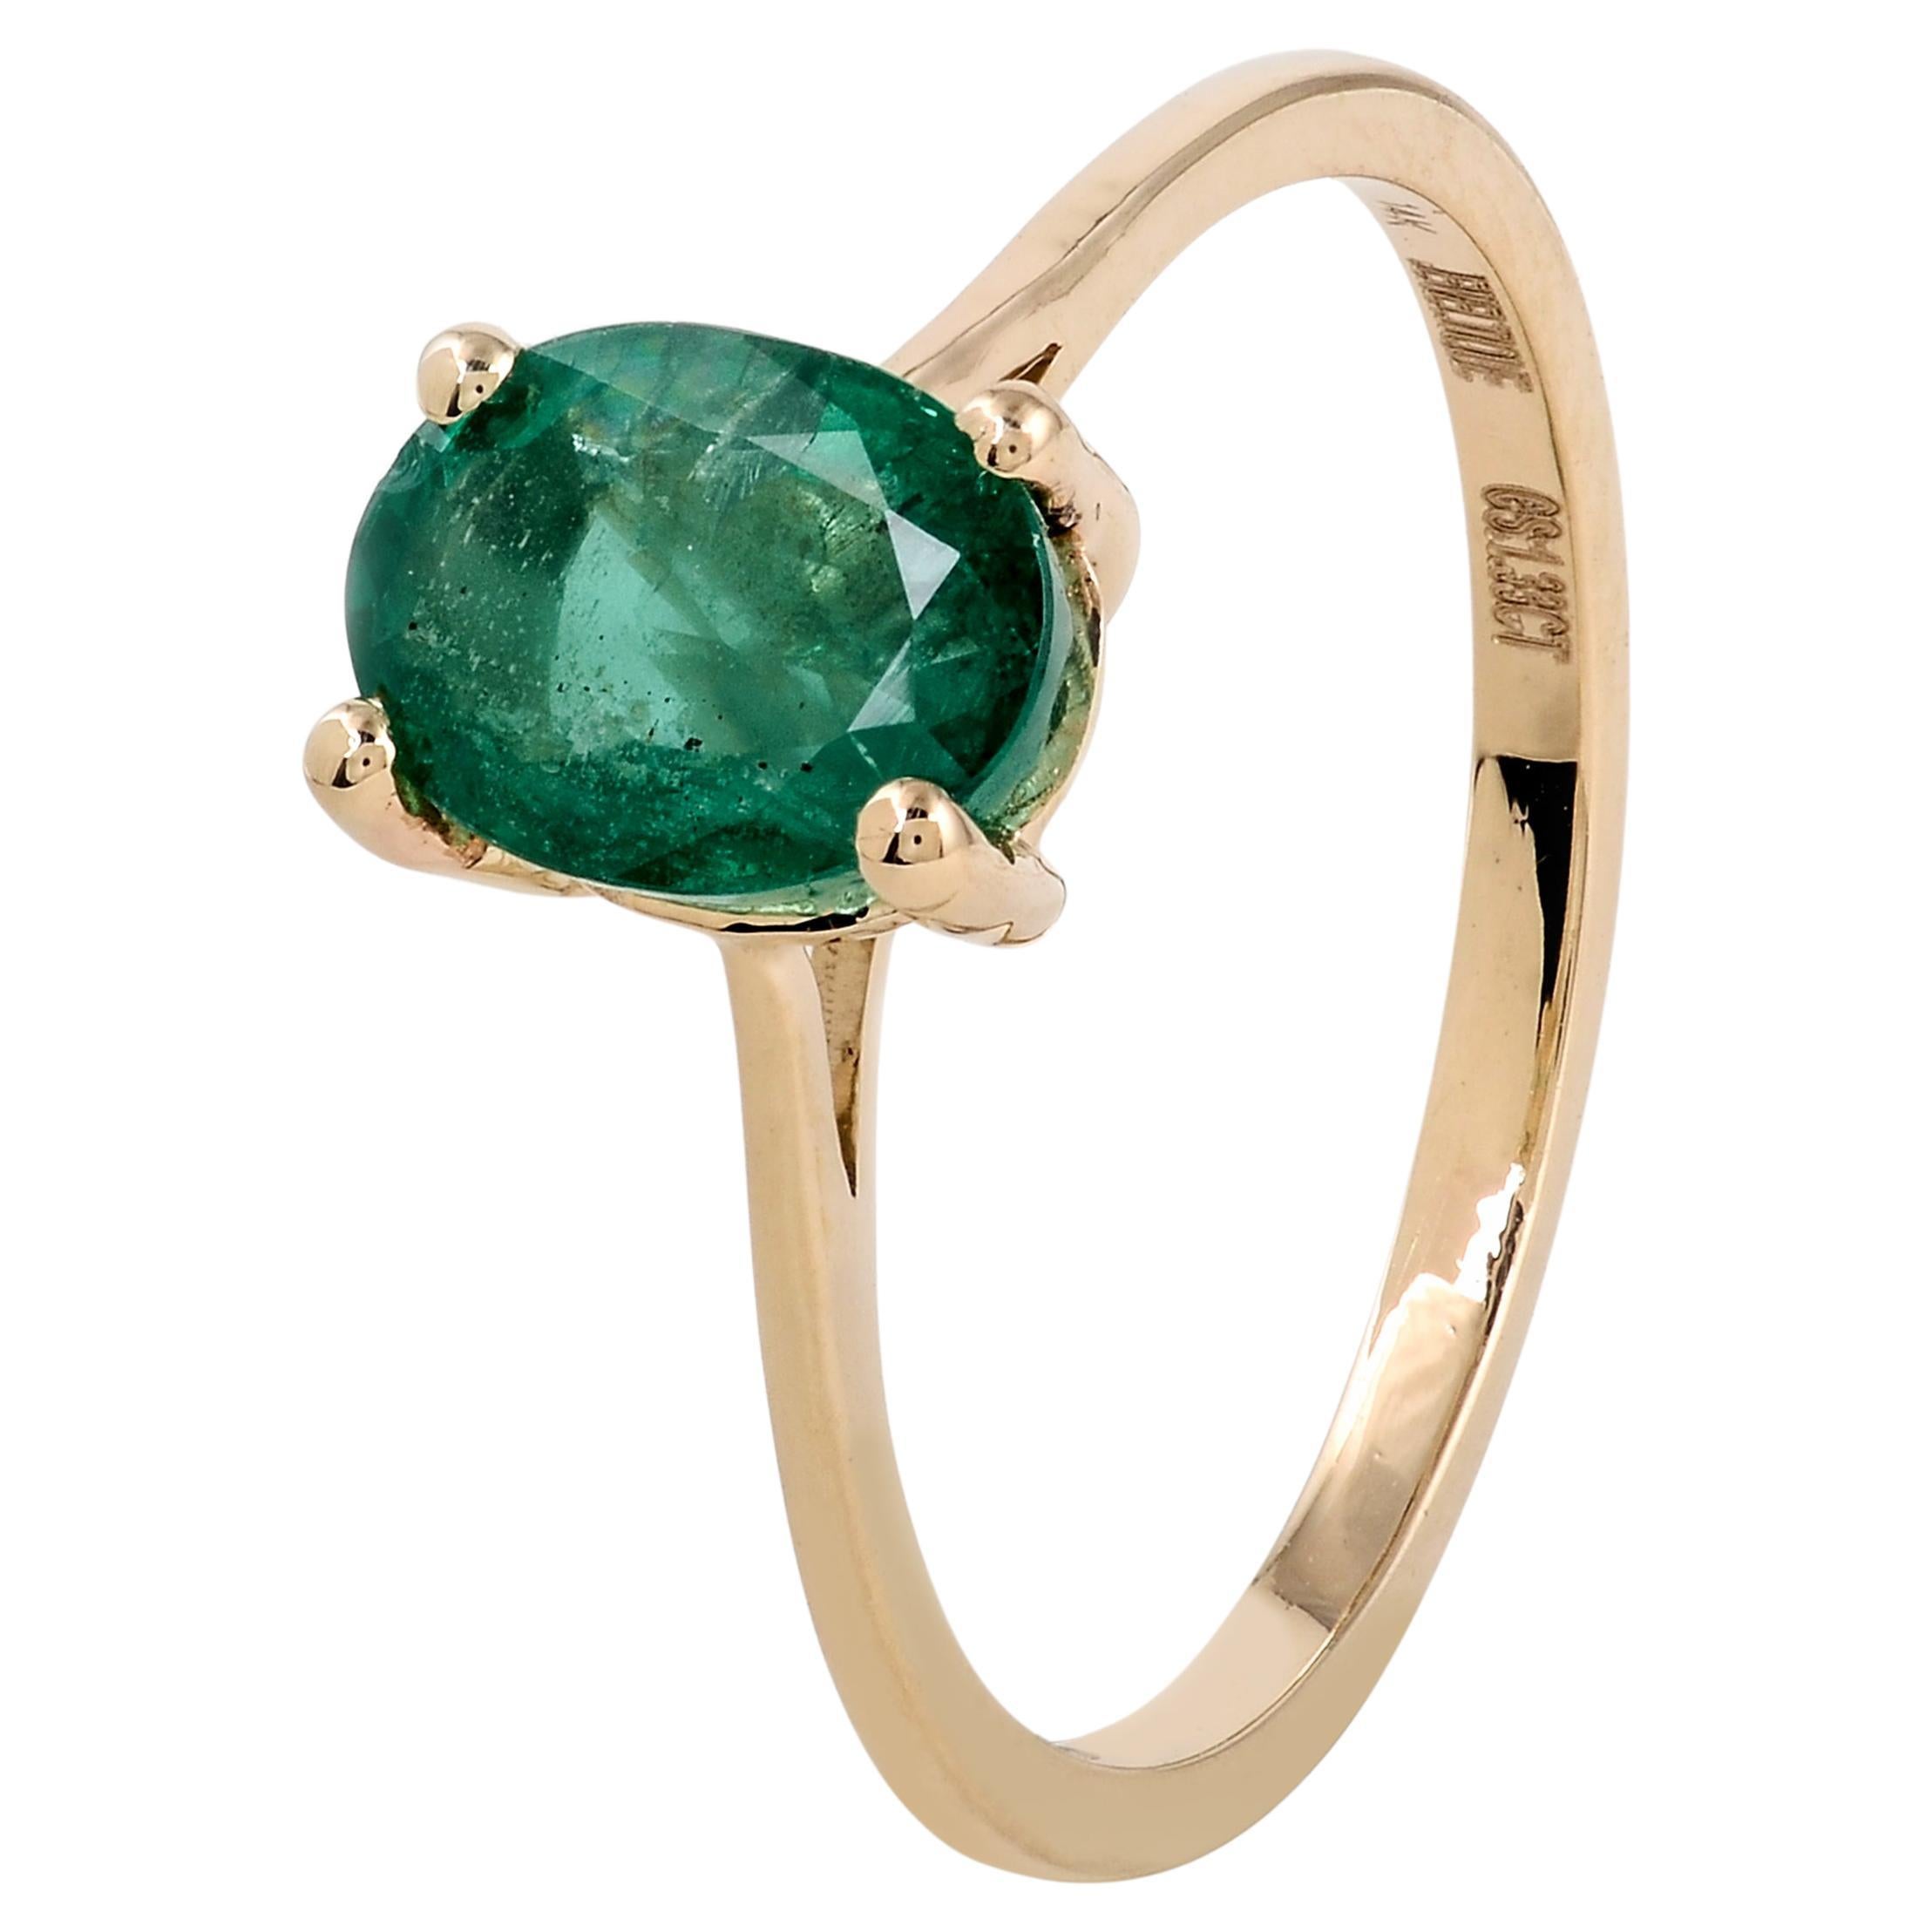 Elegant 14K 1.33ct Emerald Cocktail Ring, Size 7 - Timeless & Elegant Jewelry For Sale